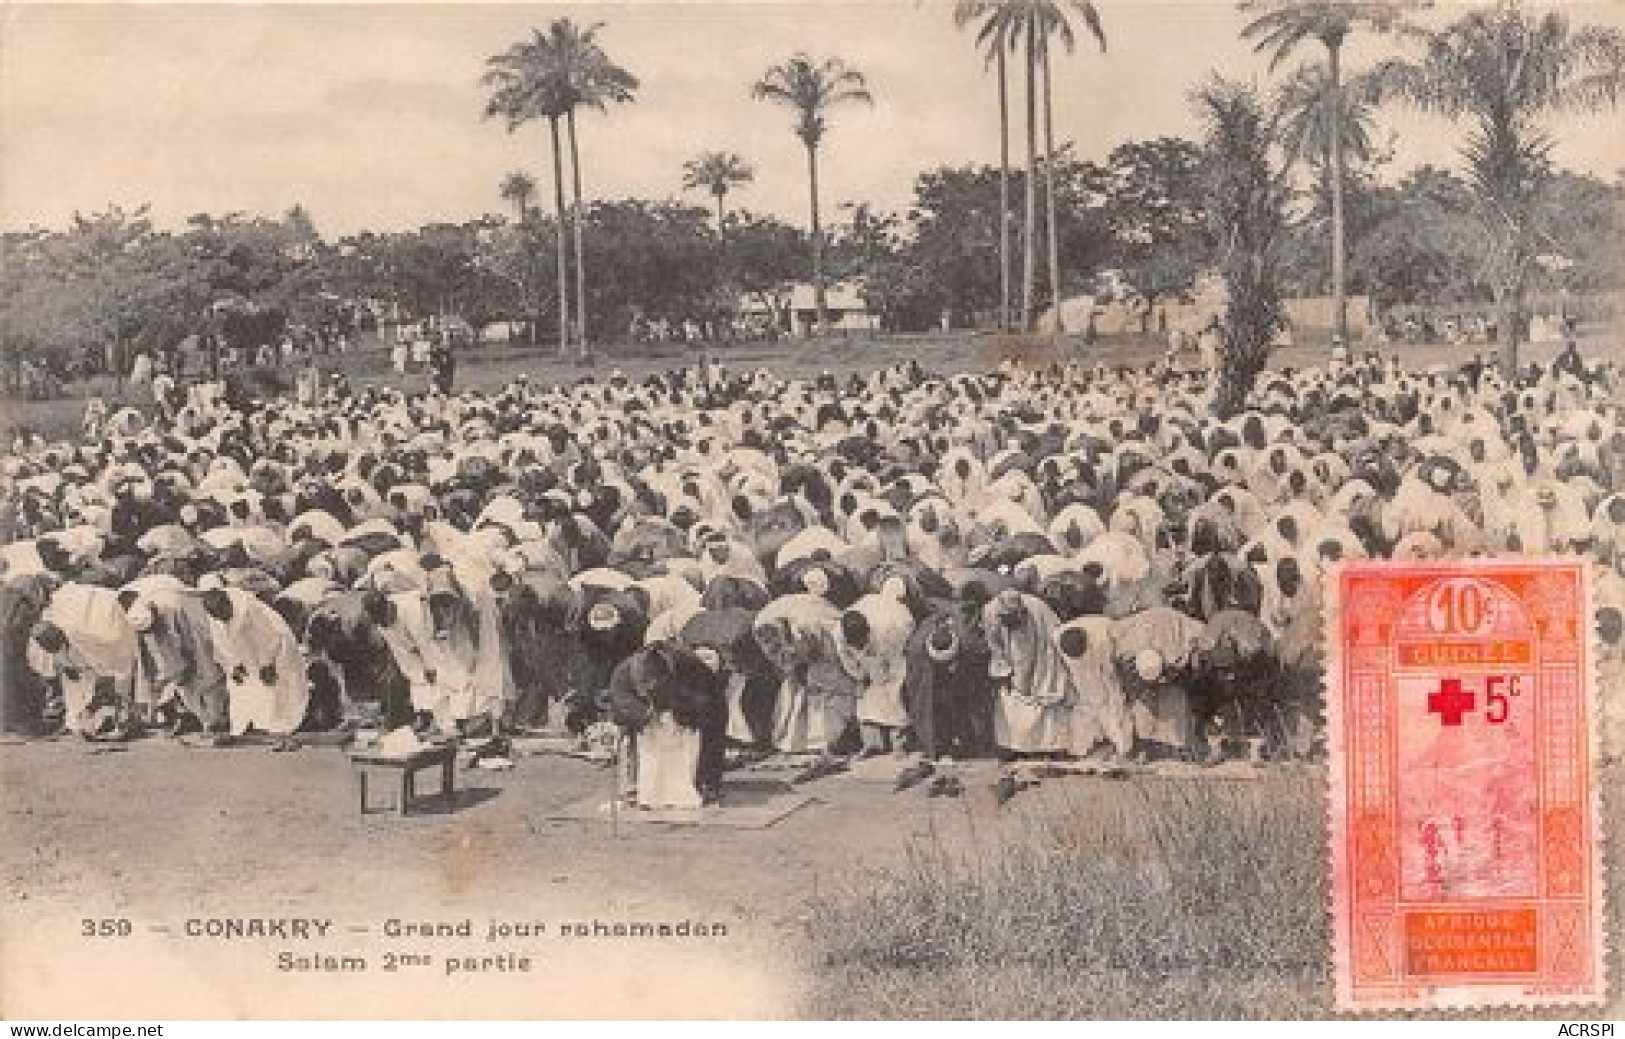 GUINEE FRANCAISE CONAKRY Grand Jour Rahamadan Salam 2eme Partie 4(scan Recto-verso) MA353 - French Guinea